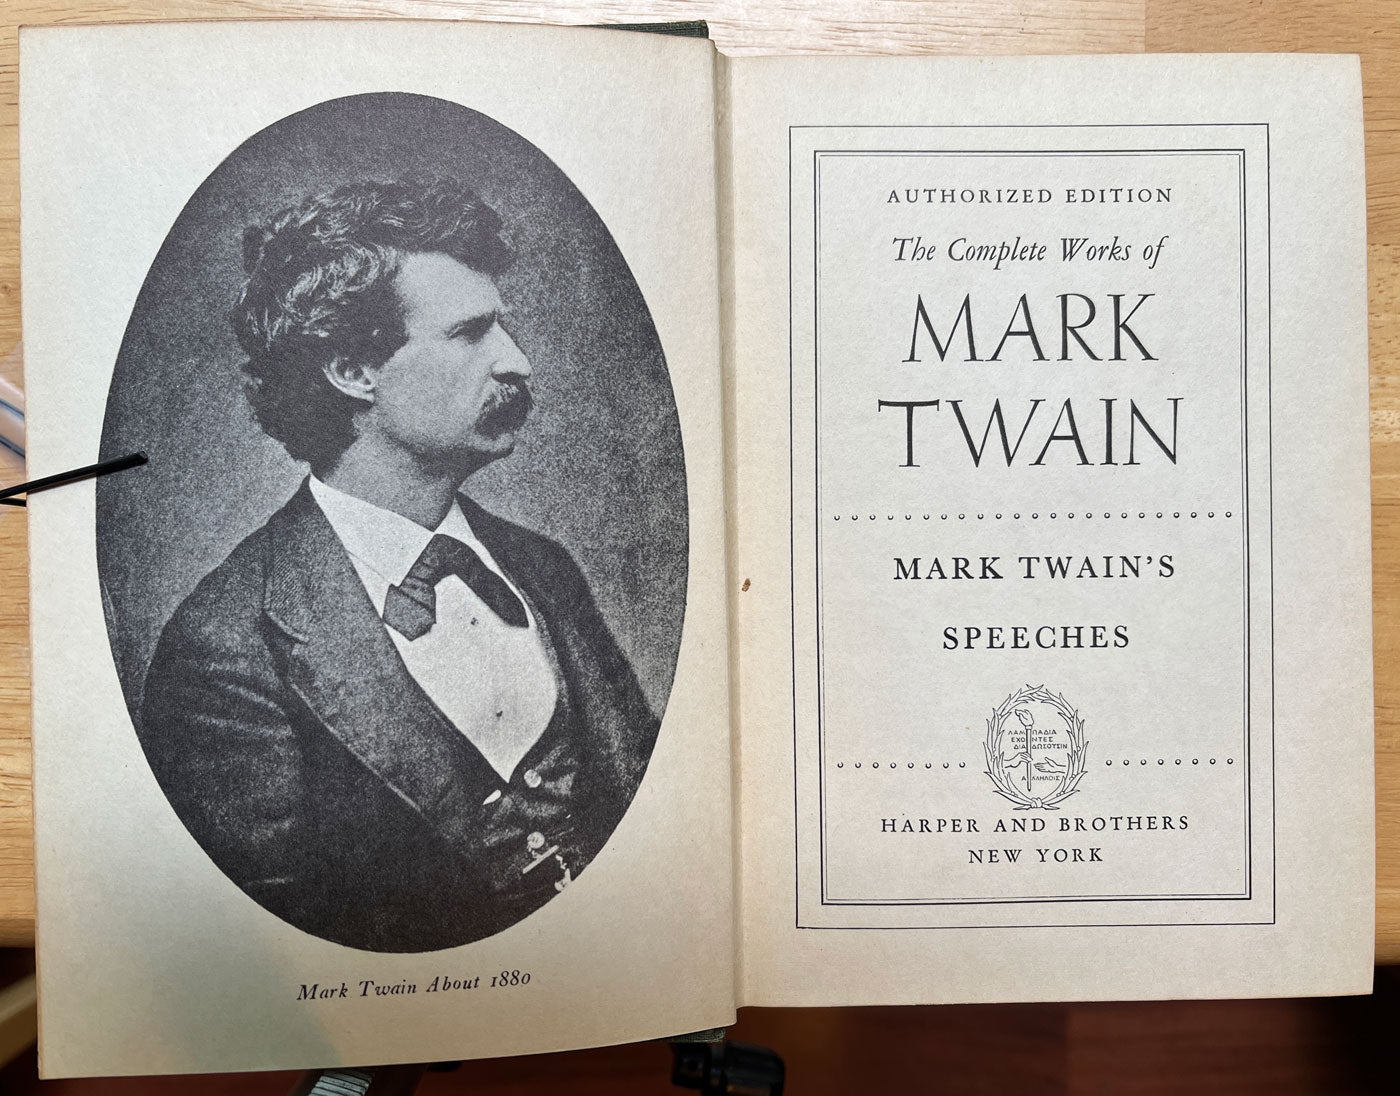 Mark Twain's Speeches title page